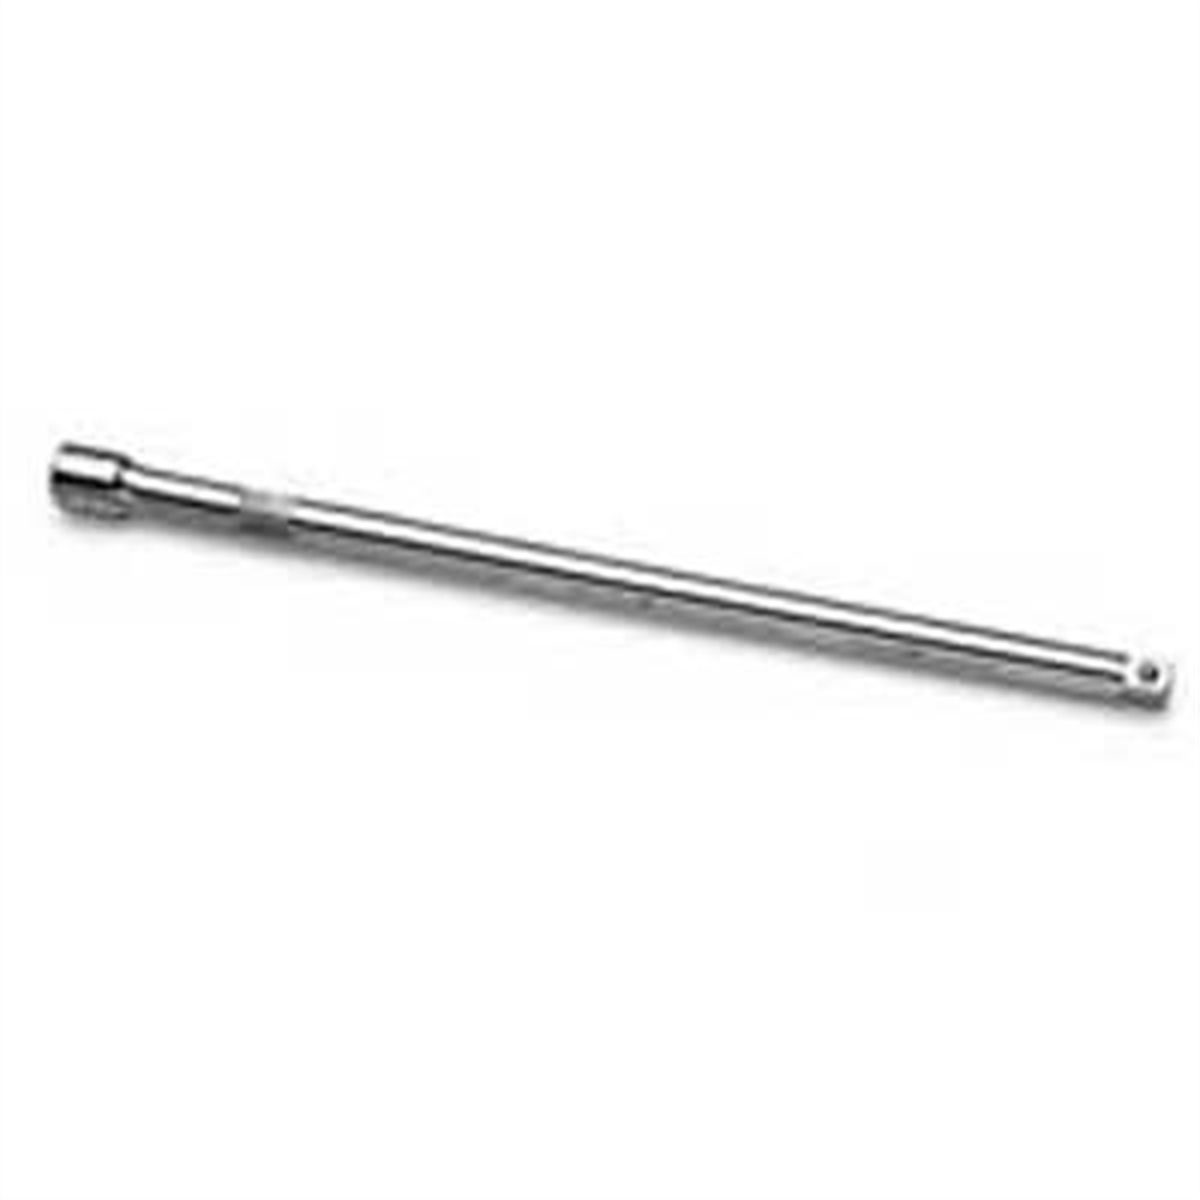 1/2 Inch Drive Extension - 15 Inch L